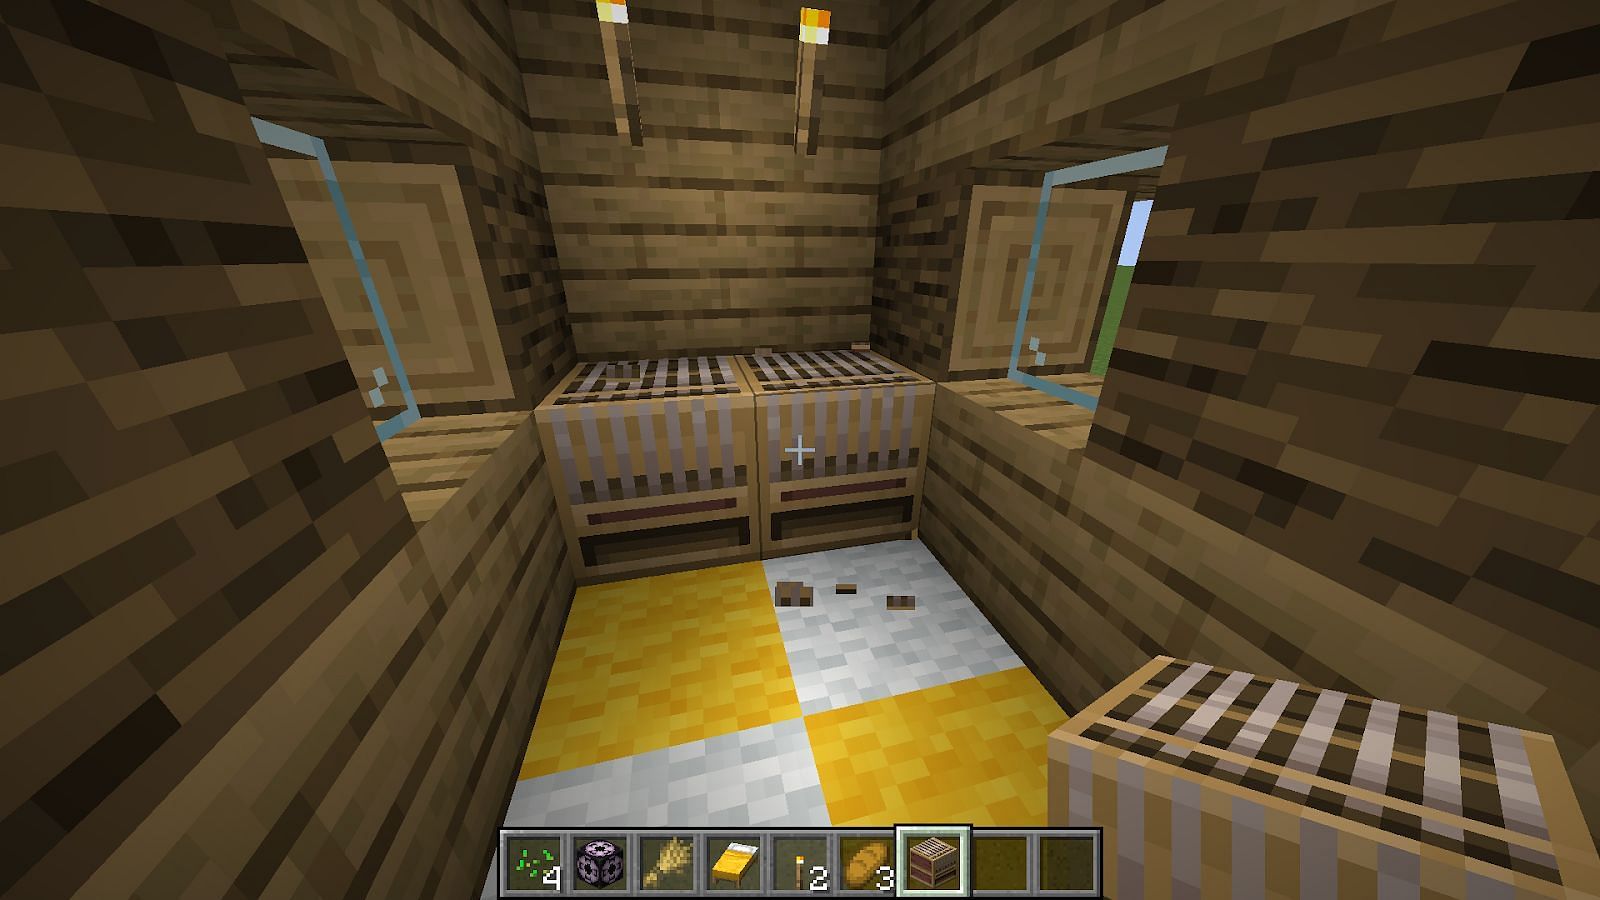 Two looms in the shepherd house in Minecraft (Image via Minecraft)